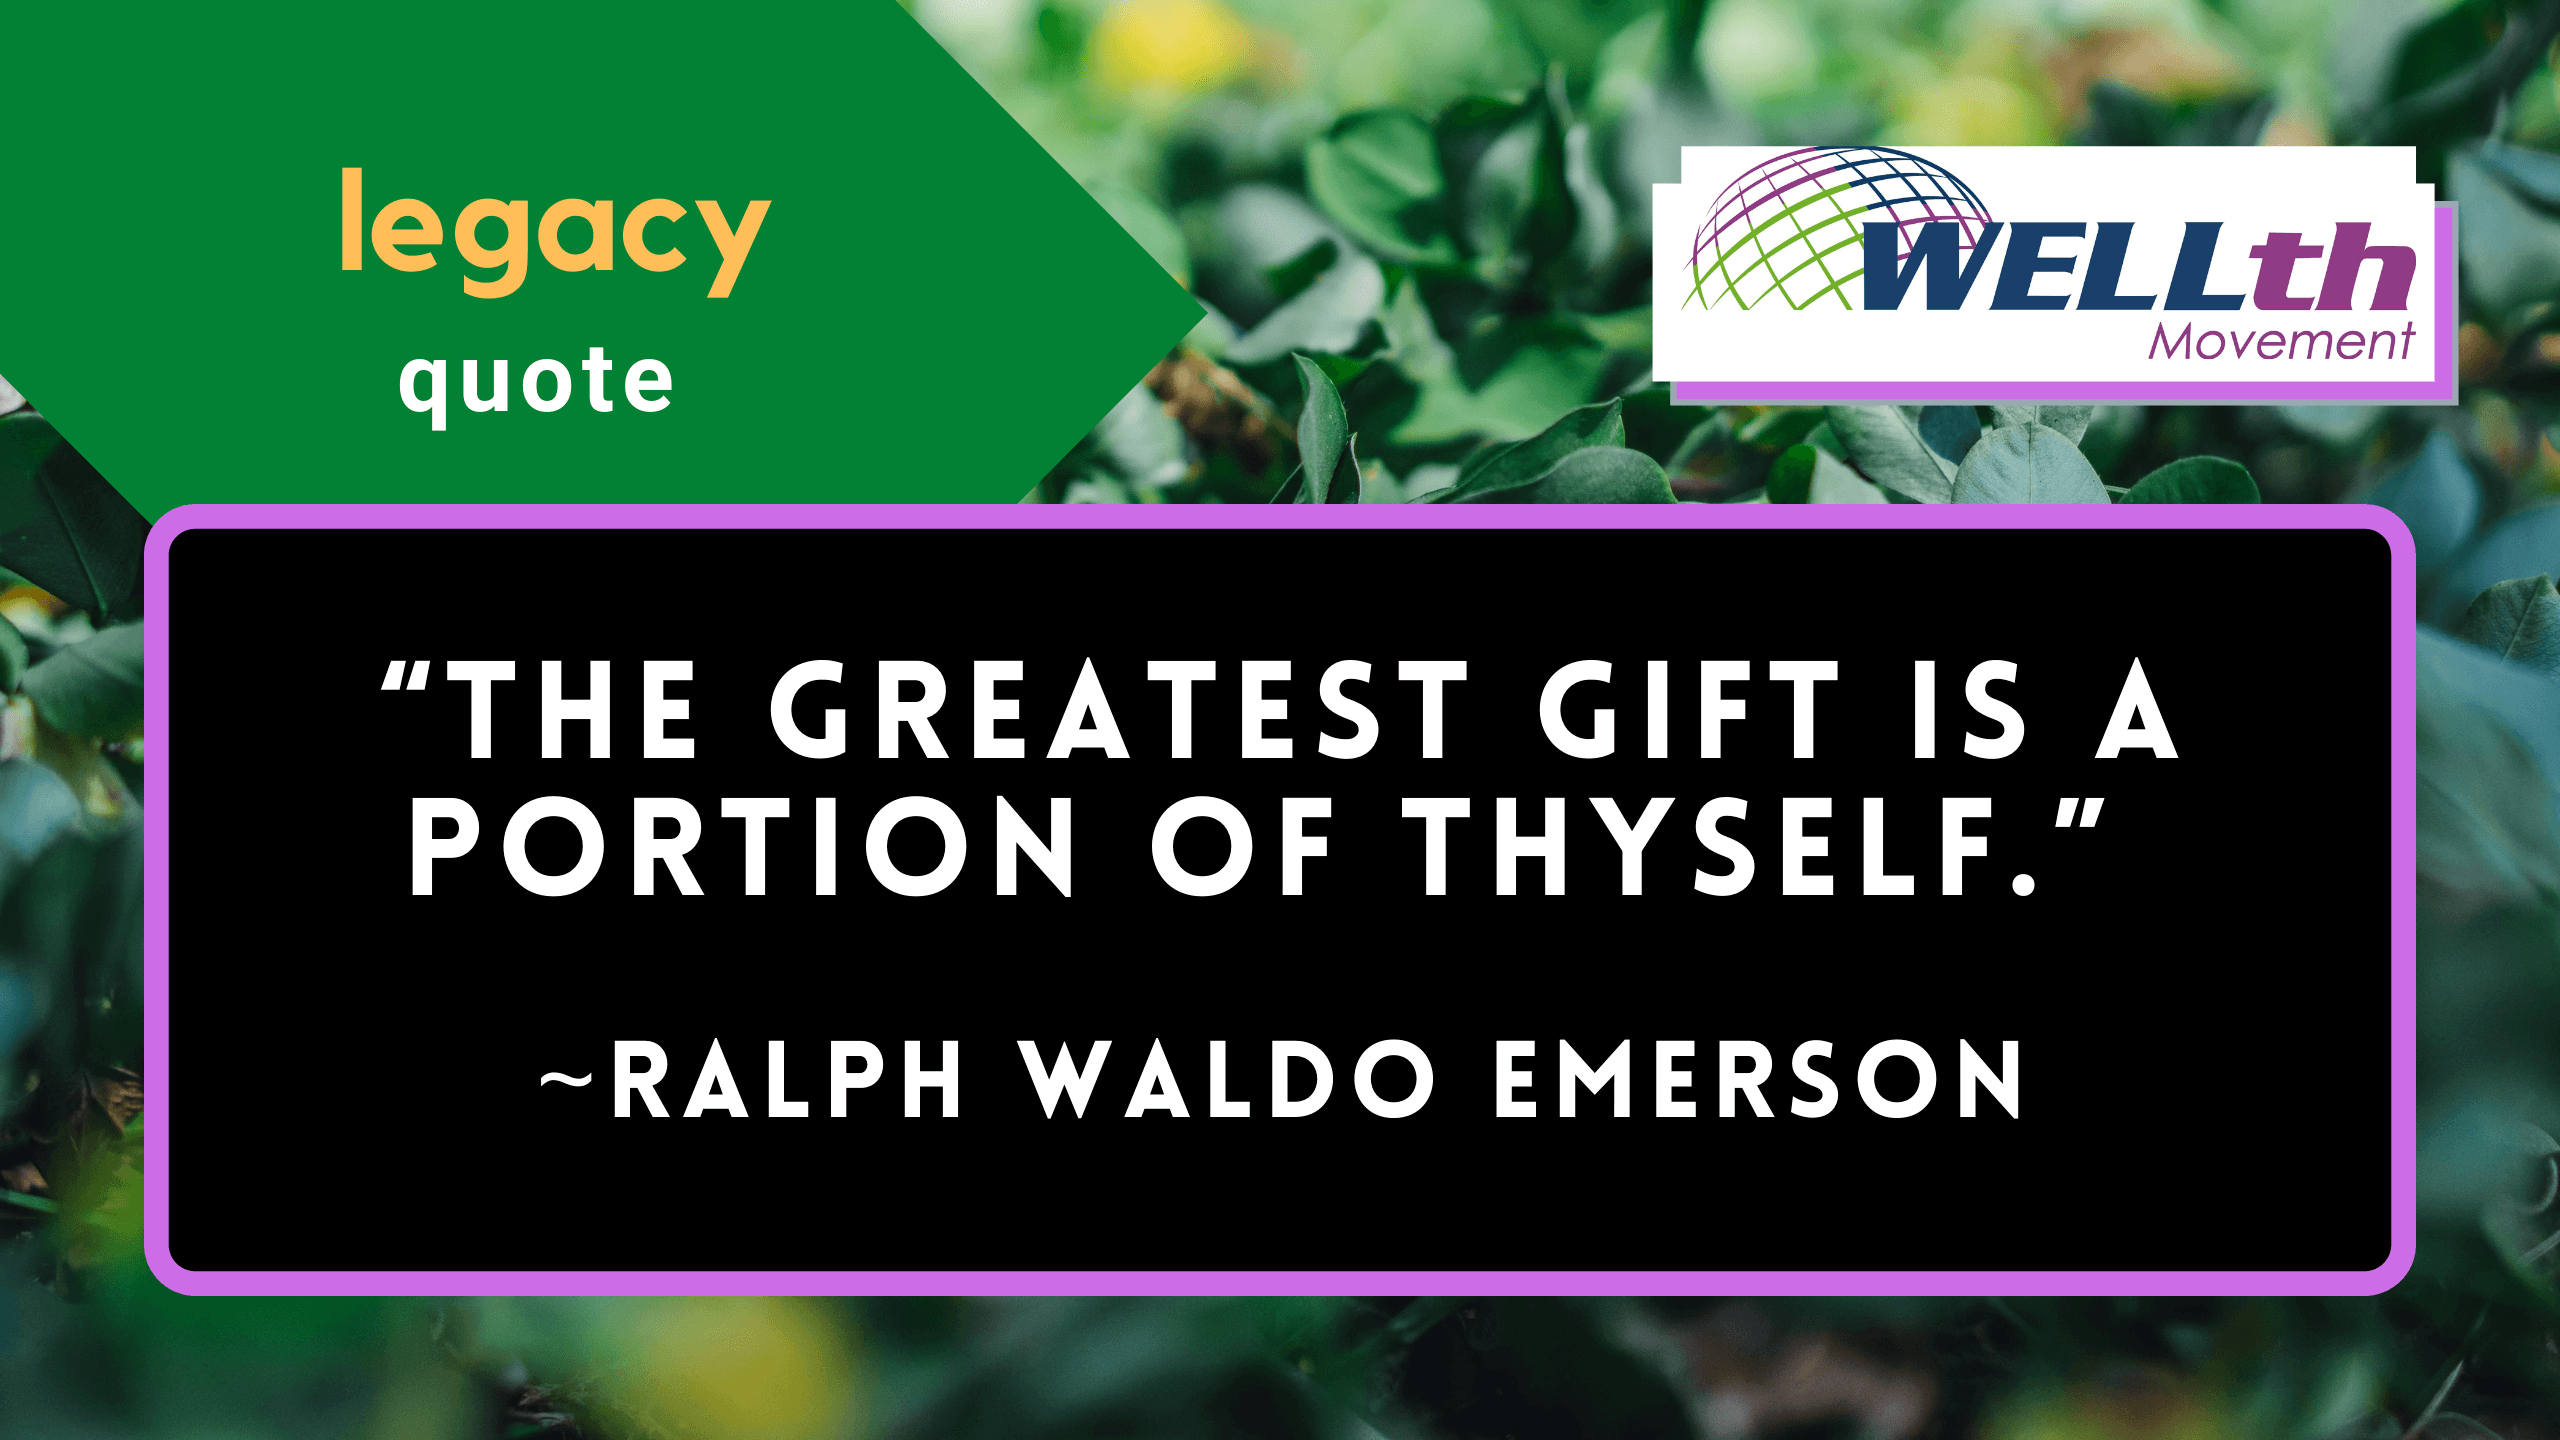 Legacy Quote Emerson Portion of Self